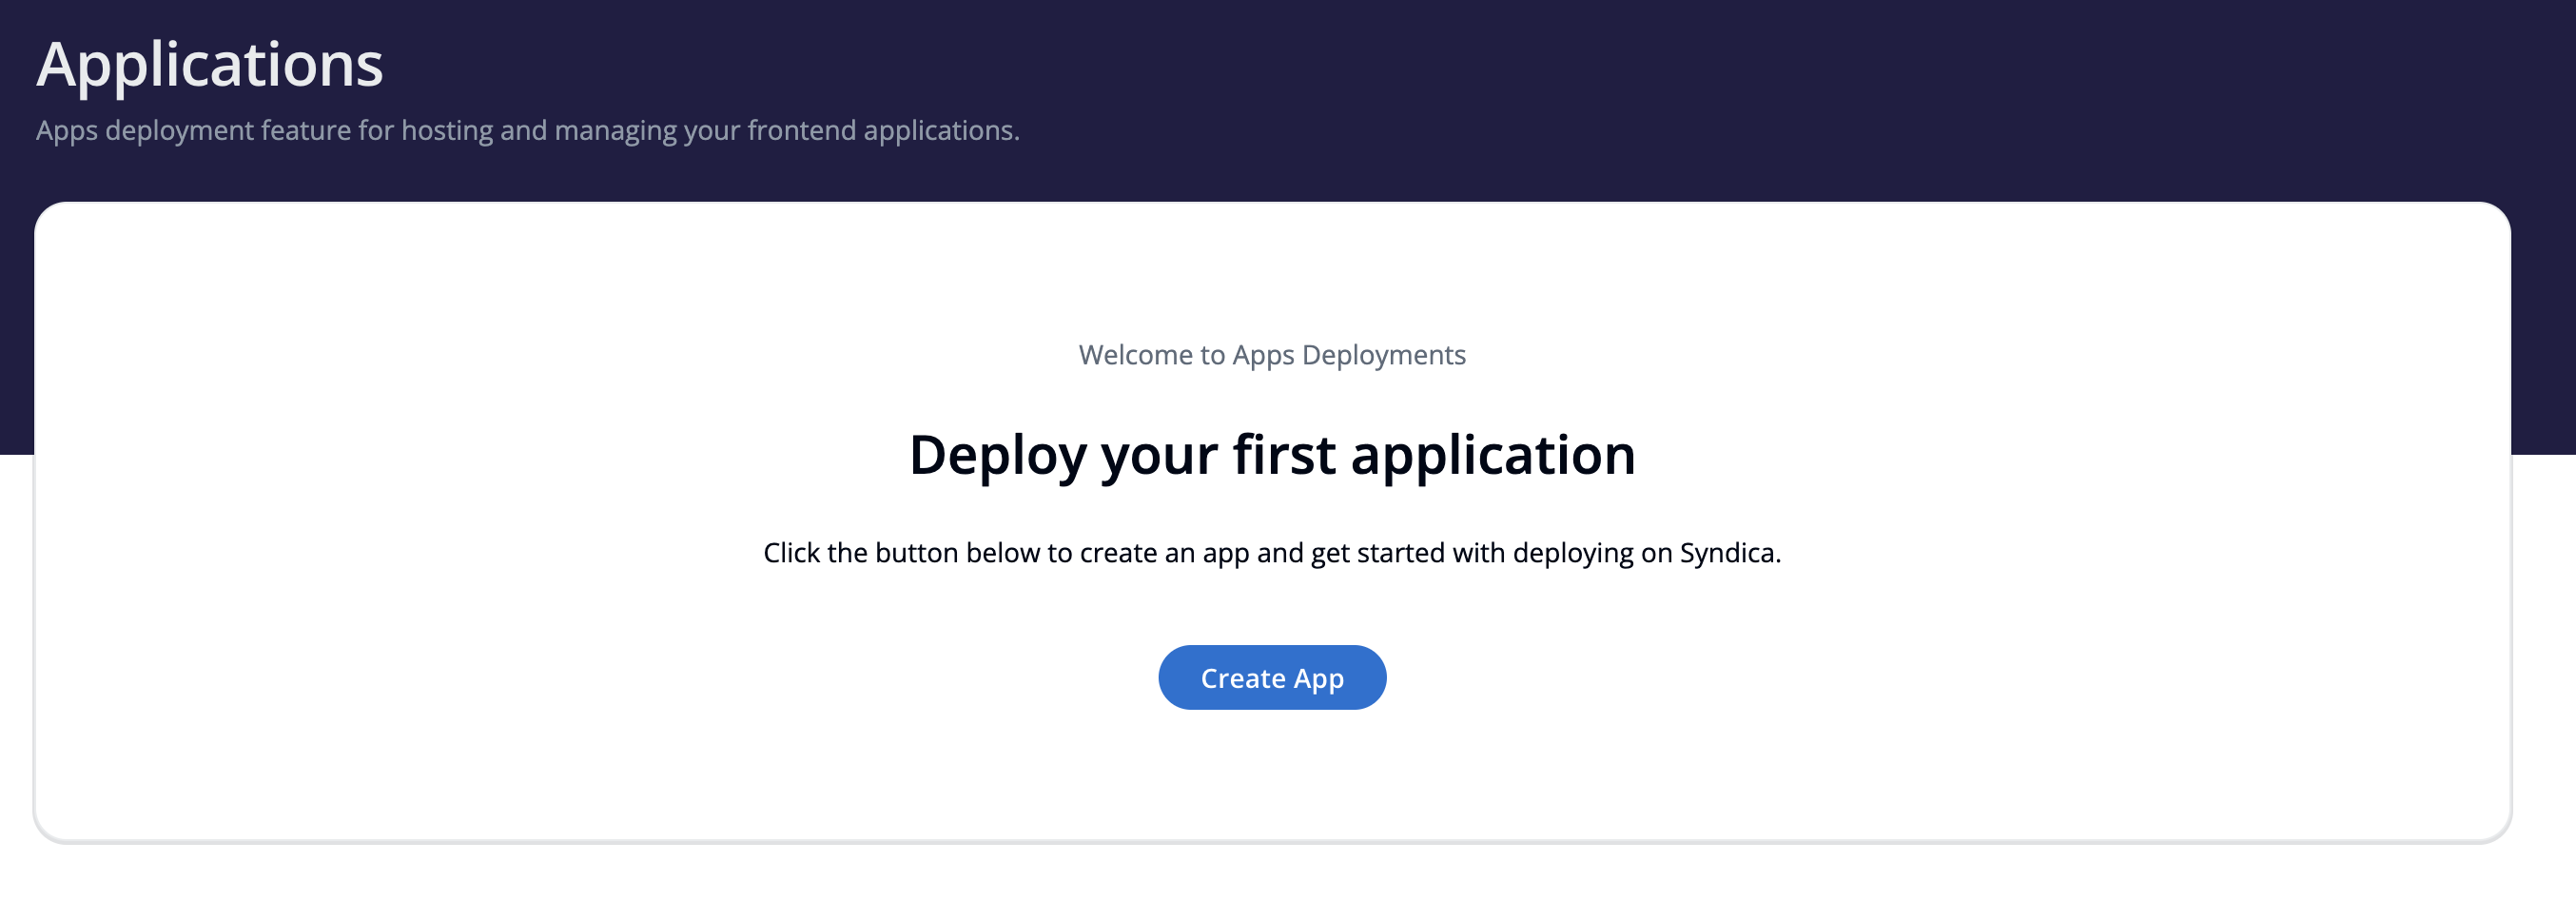 An empty applications page